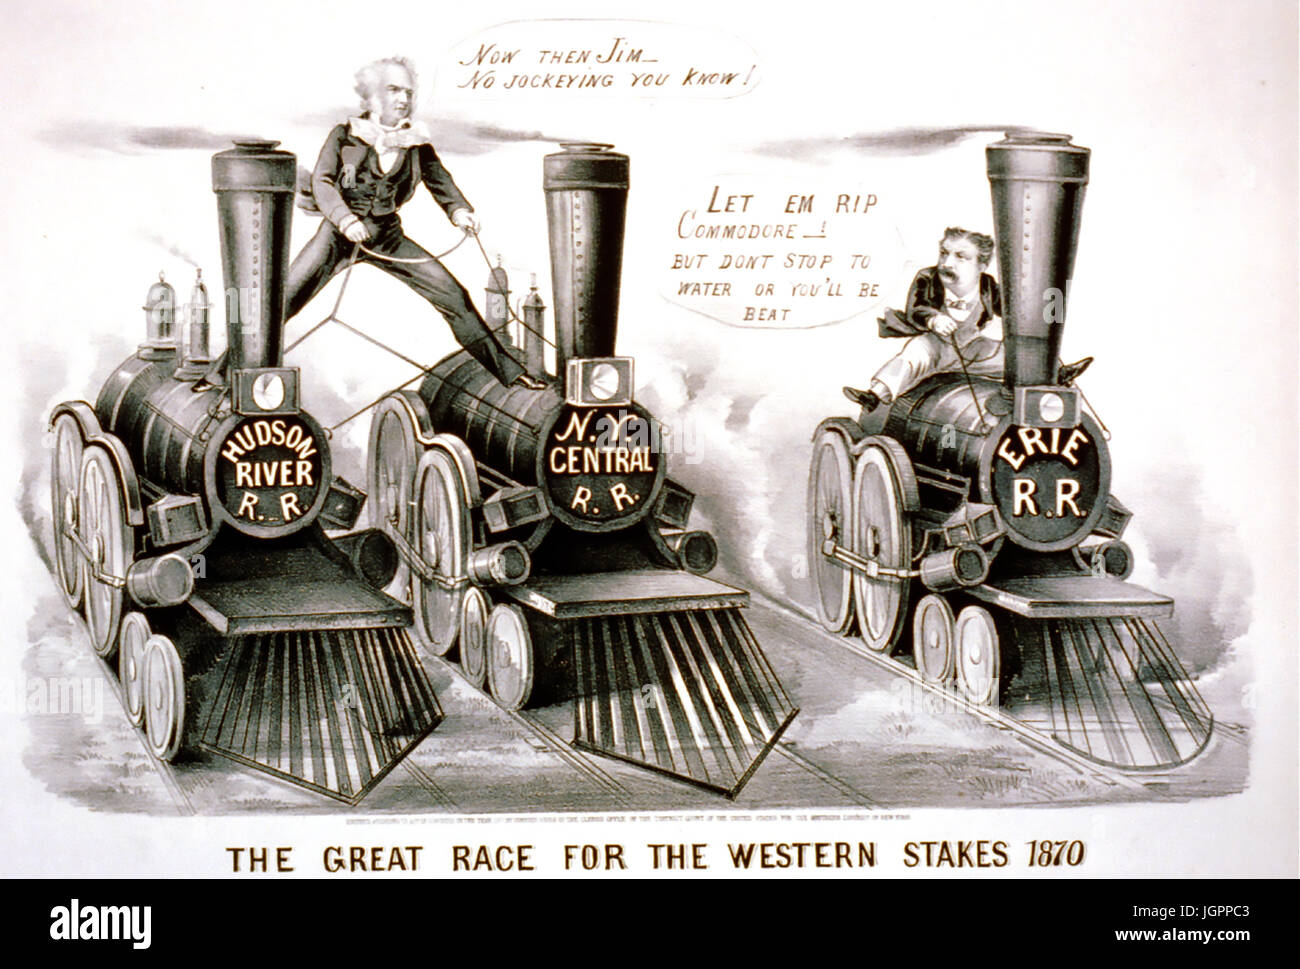 THE GREAT RACE FOR THE WESTERN STAKES 1870. Currier & Ives lithograph showing Cornelius Vanderbilt at left competing with James Fisk Jnr  to take over the bankrupt Erie Railroad Stock Photo